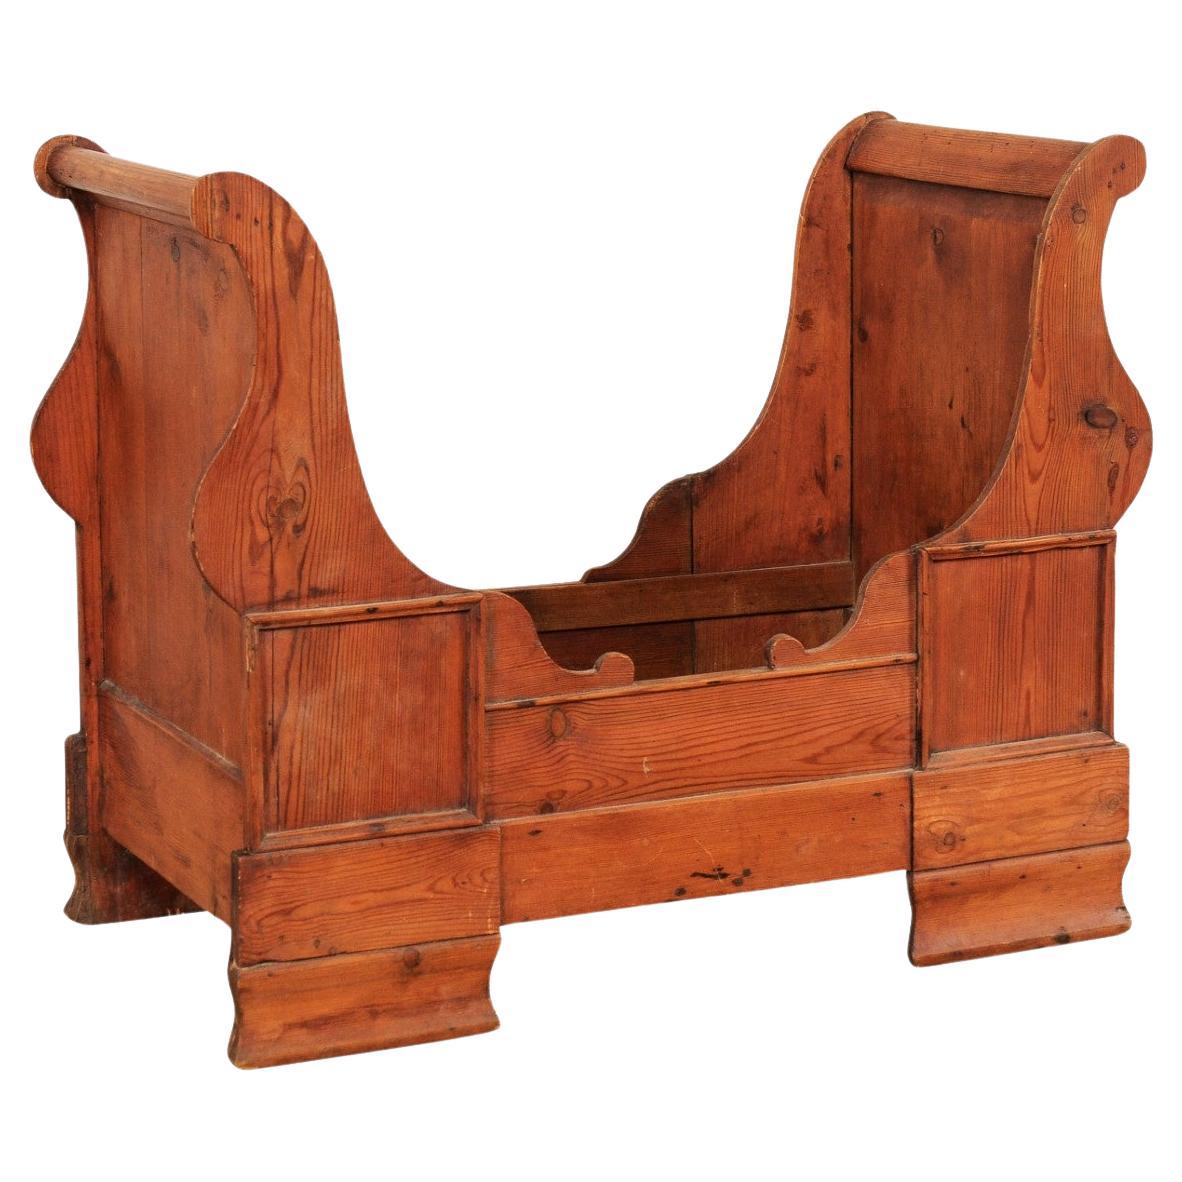 Antique Swedish Wood-Carved Sleigh Dog Bed (For the Pampered Pooch or Kitty!)  For Sale